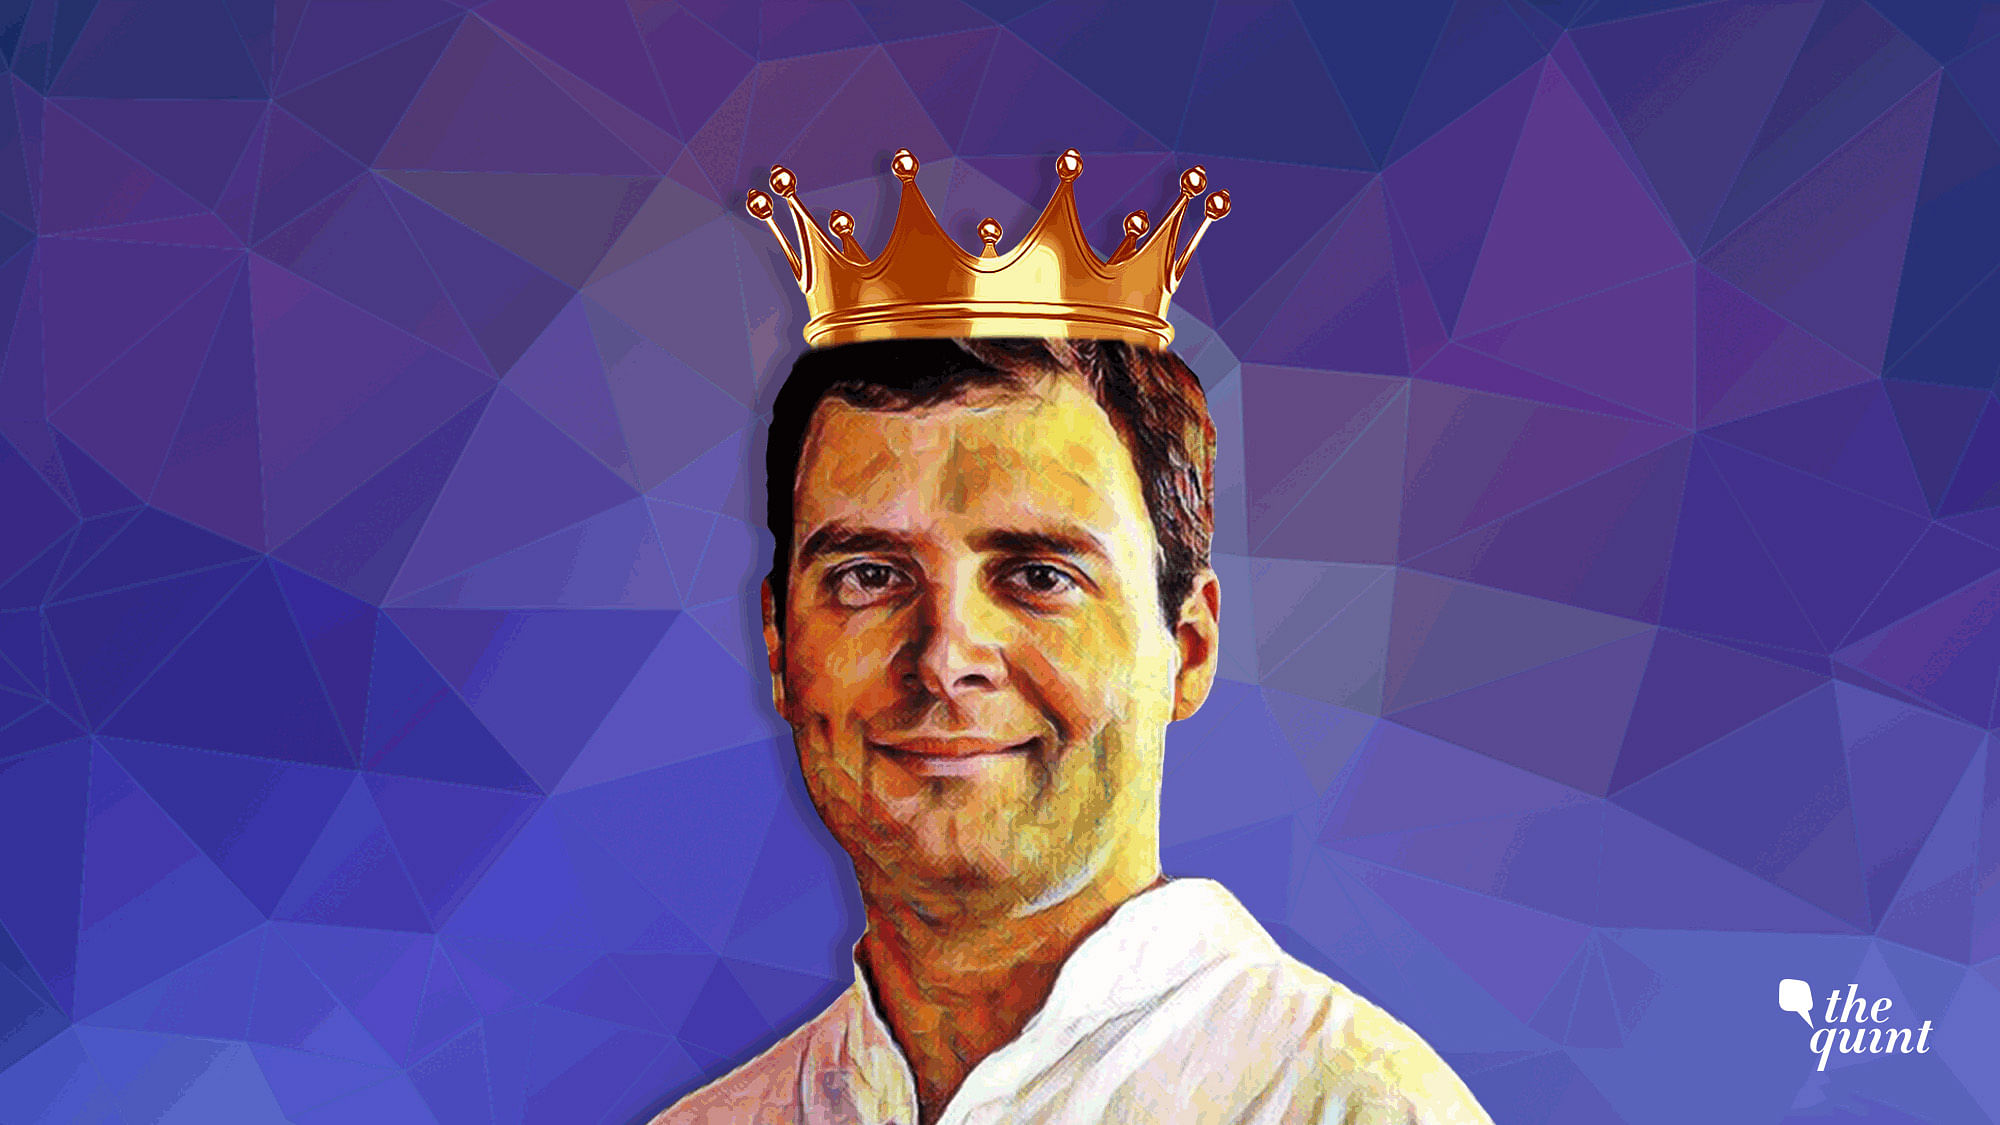 Congress President Rahul Gandhi has an uphill task, but the time is now, for him, and the Congress to act, before 2019 general elections.